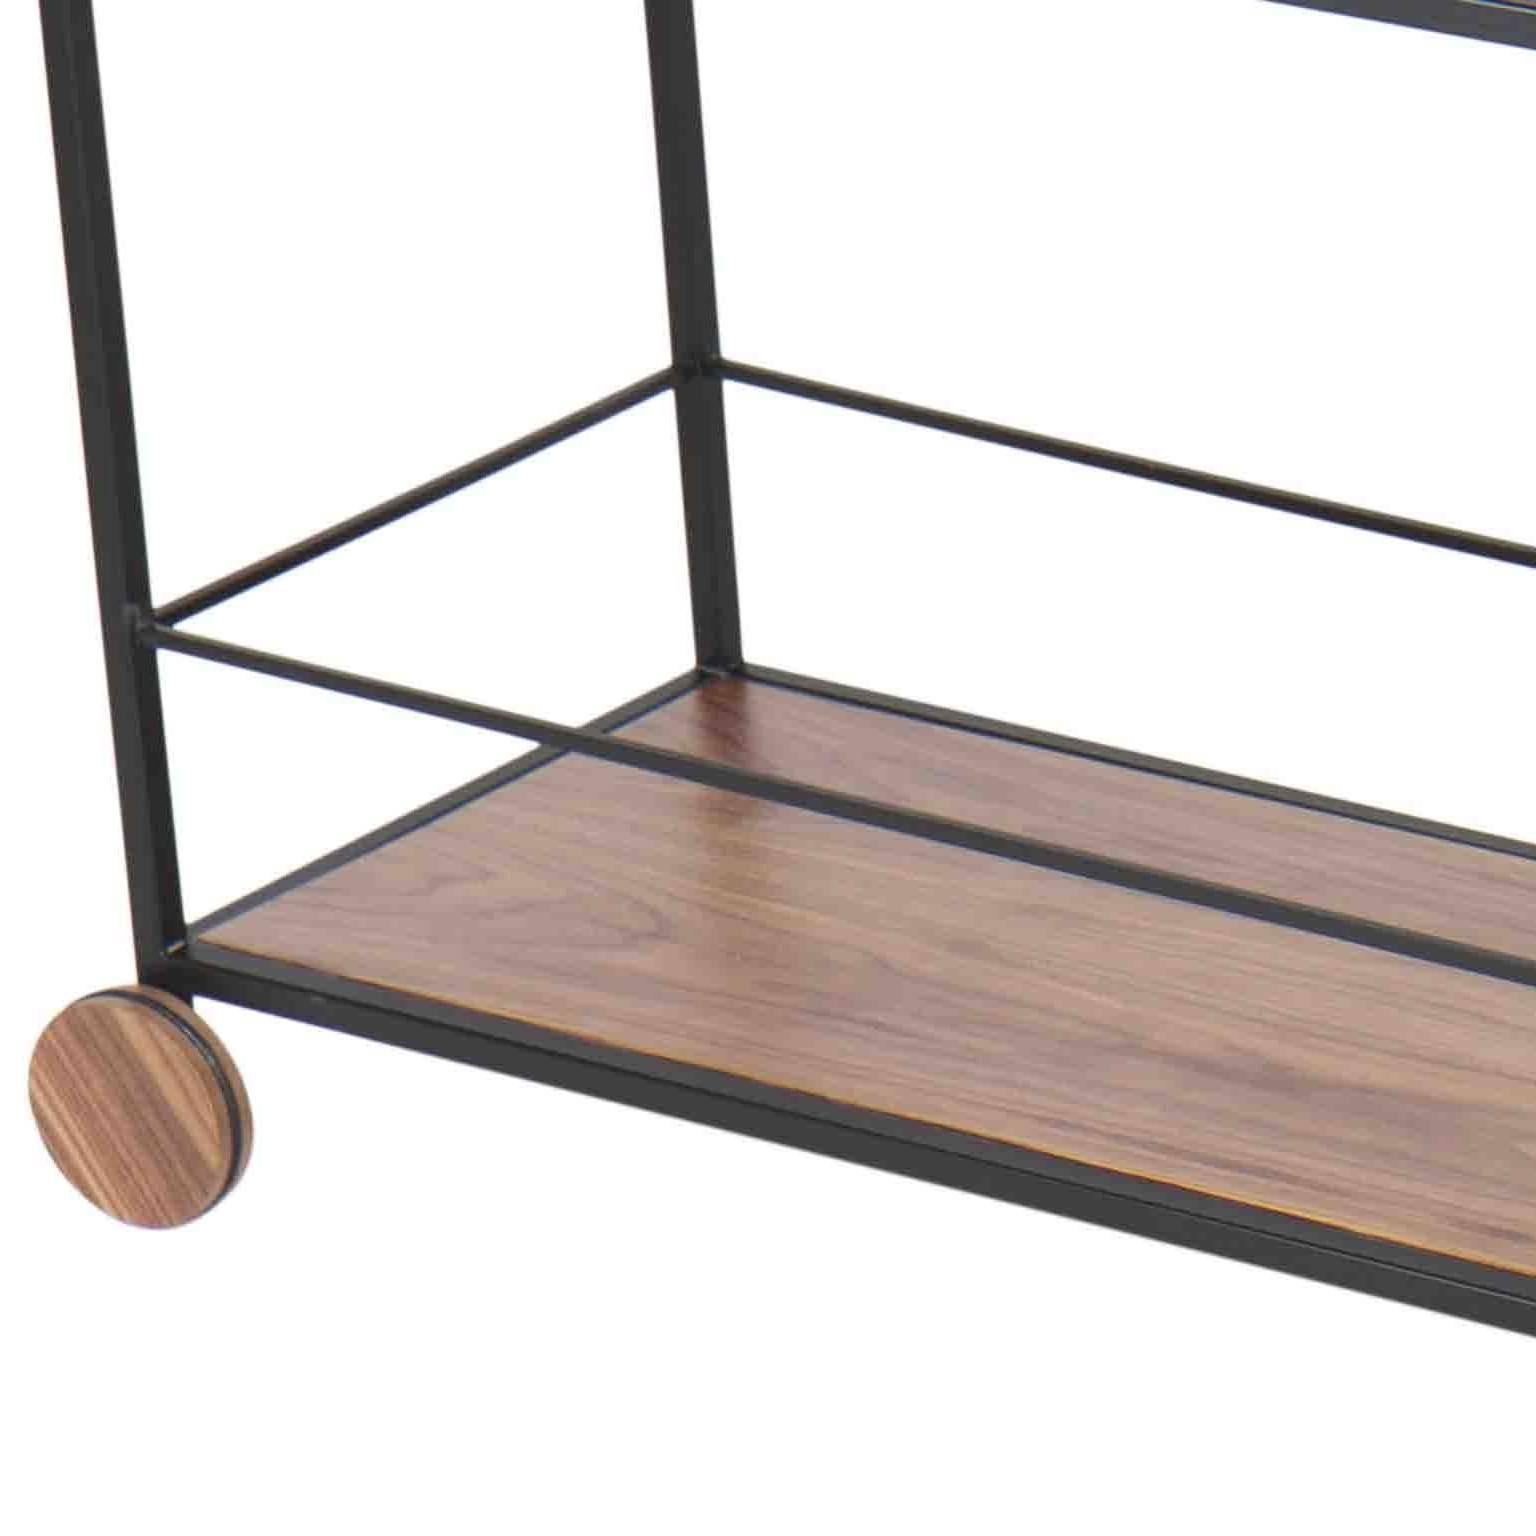 Bar or tea trolley, or sideboard, in full size. With structure and design in carbon steel painted in black, with functional support drawer in catuaba wood and glass top, with 4 wheels.

Item Details:
WOOD: EBONIZED JEQUITIBA WITH EXTRA CLEAR GLASS